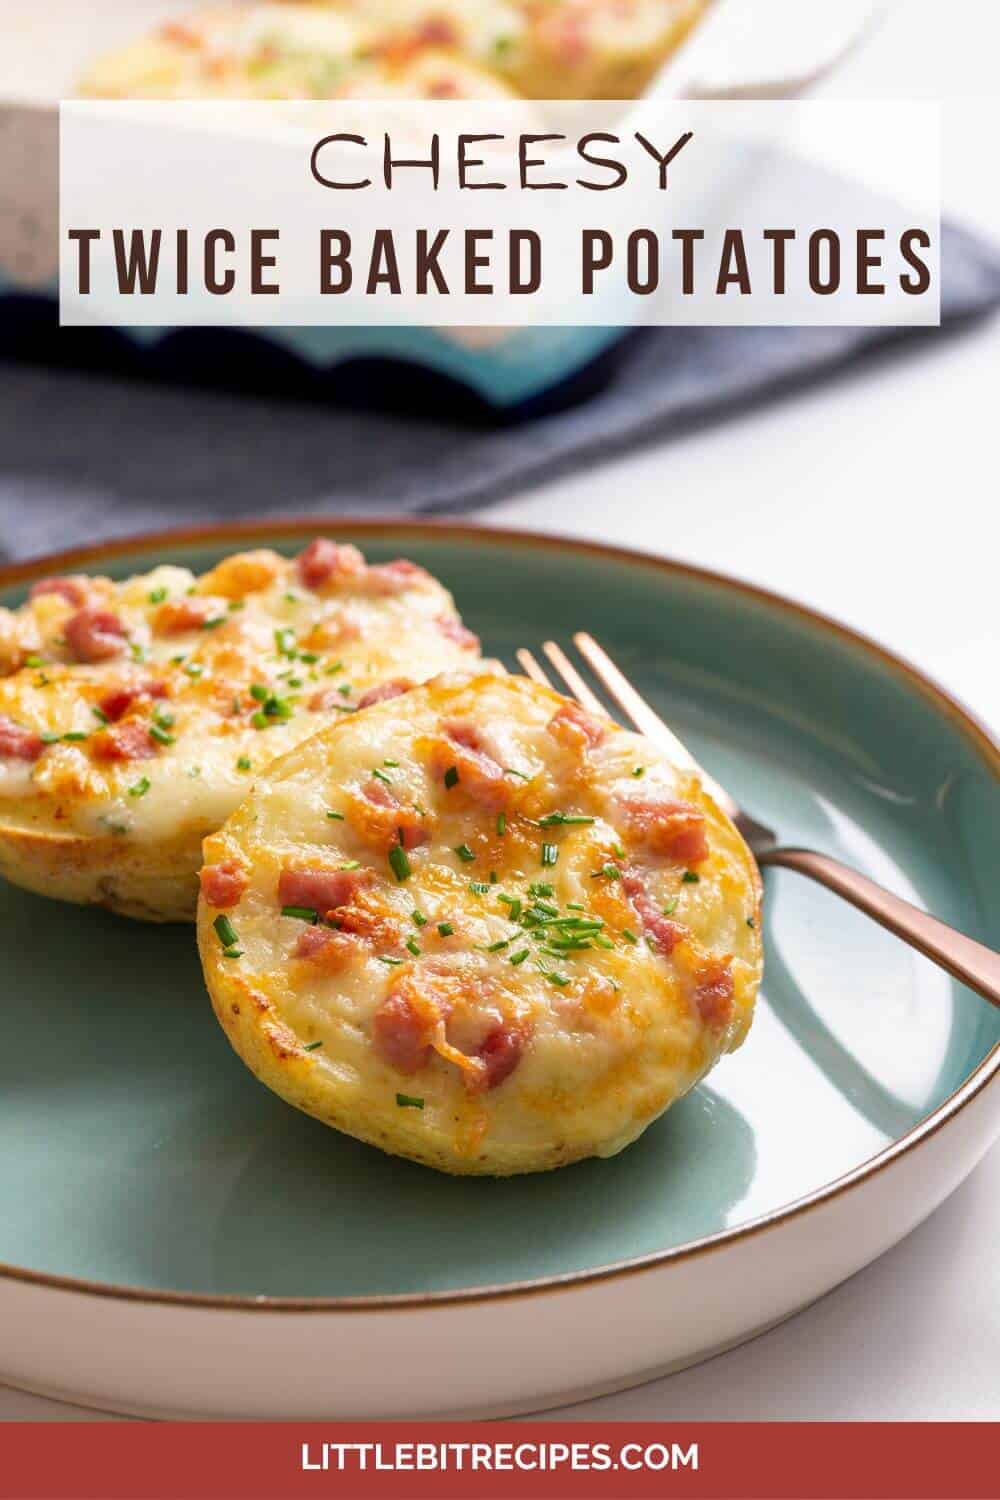 Twice baked potatoes with text on image.